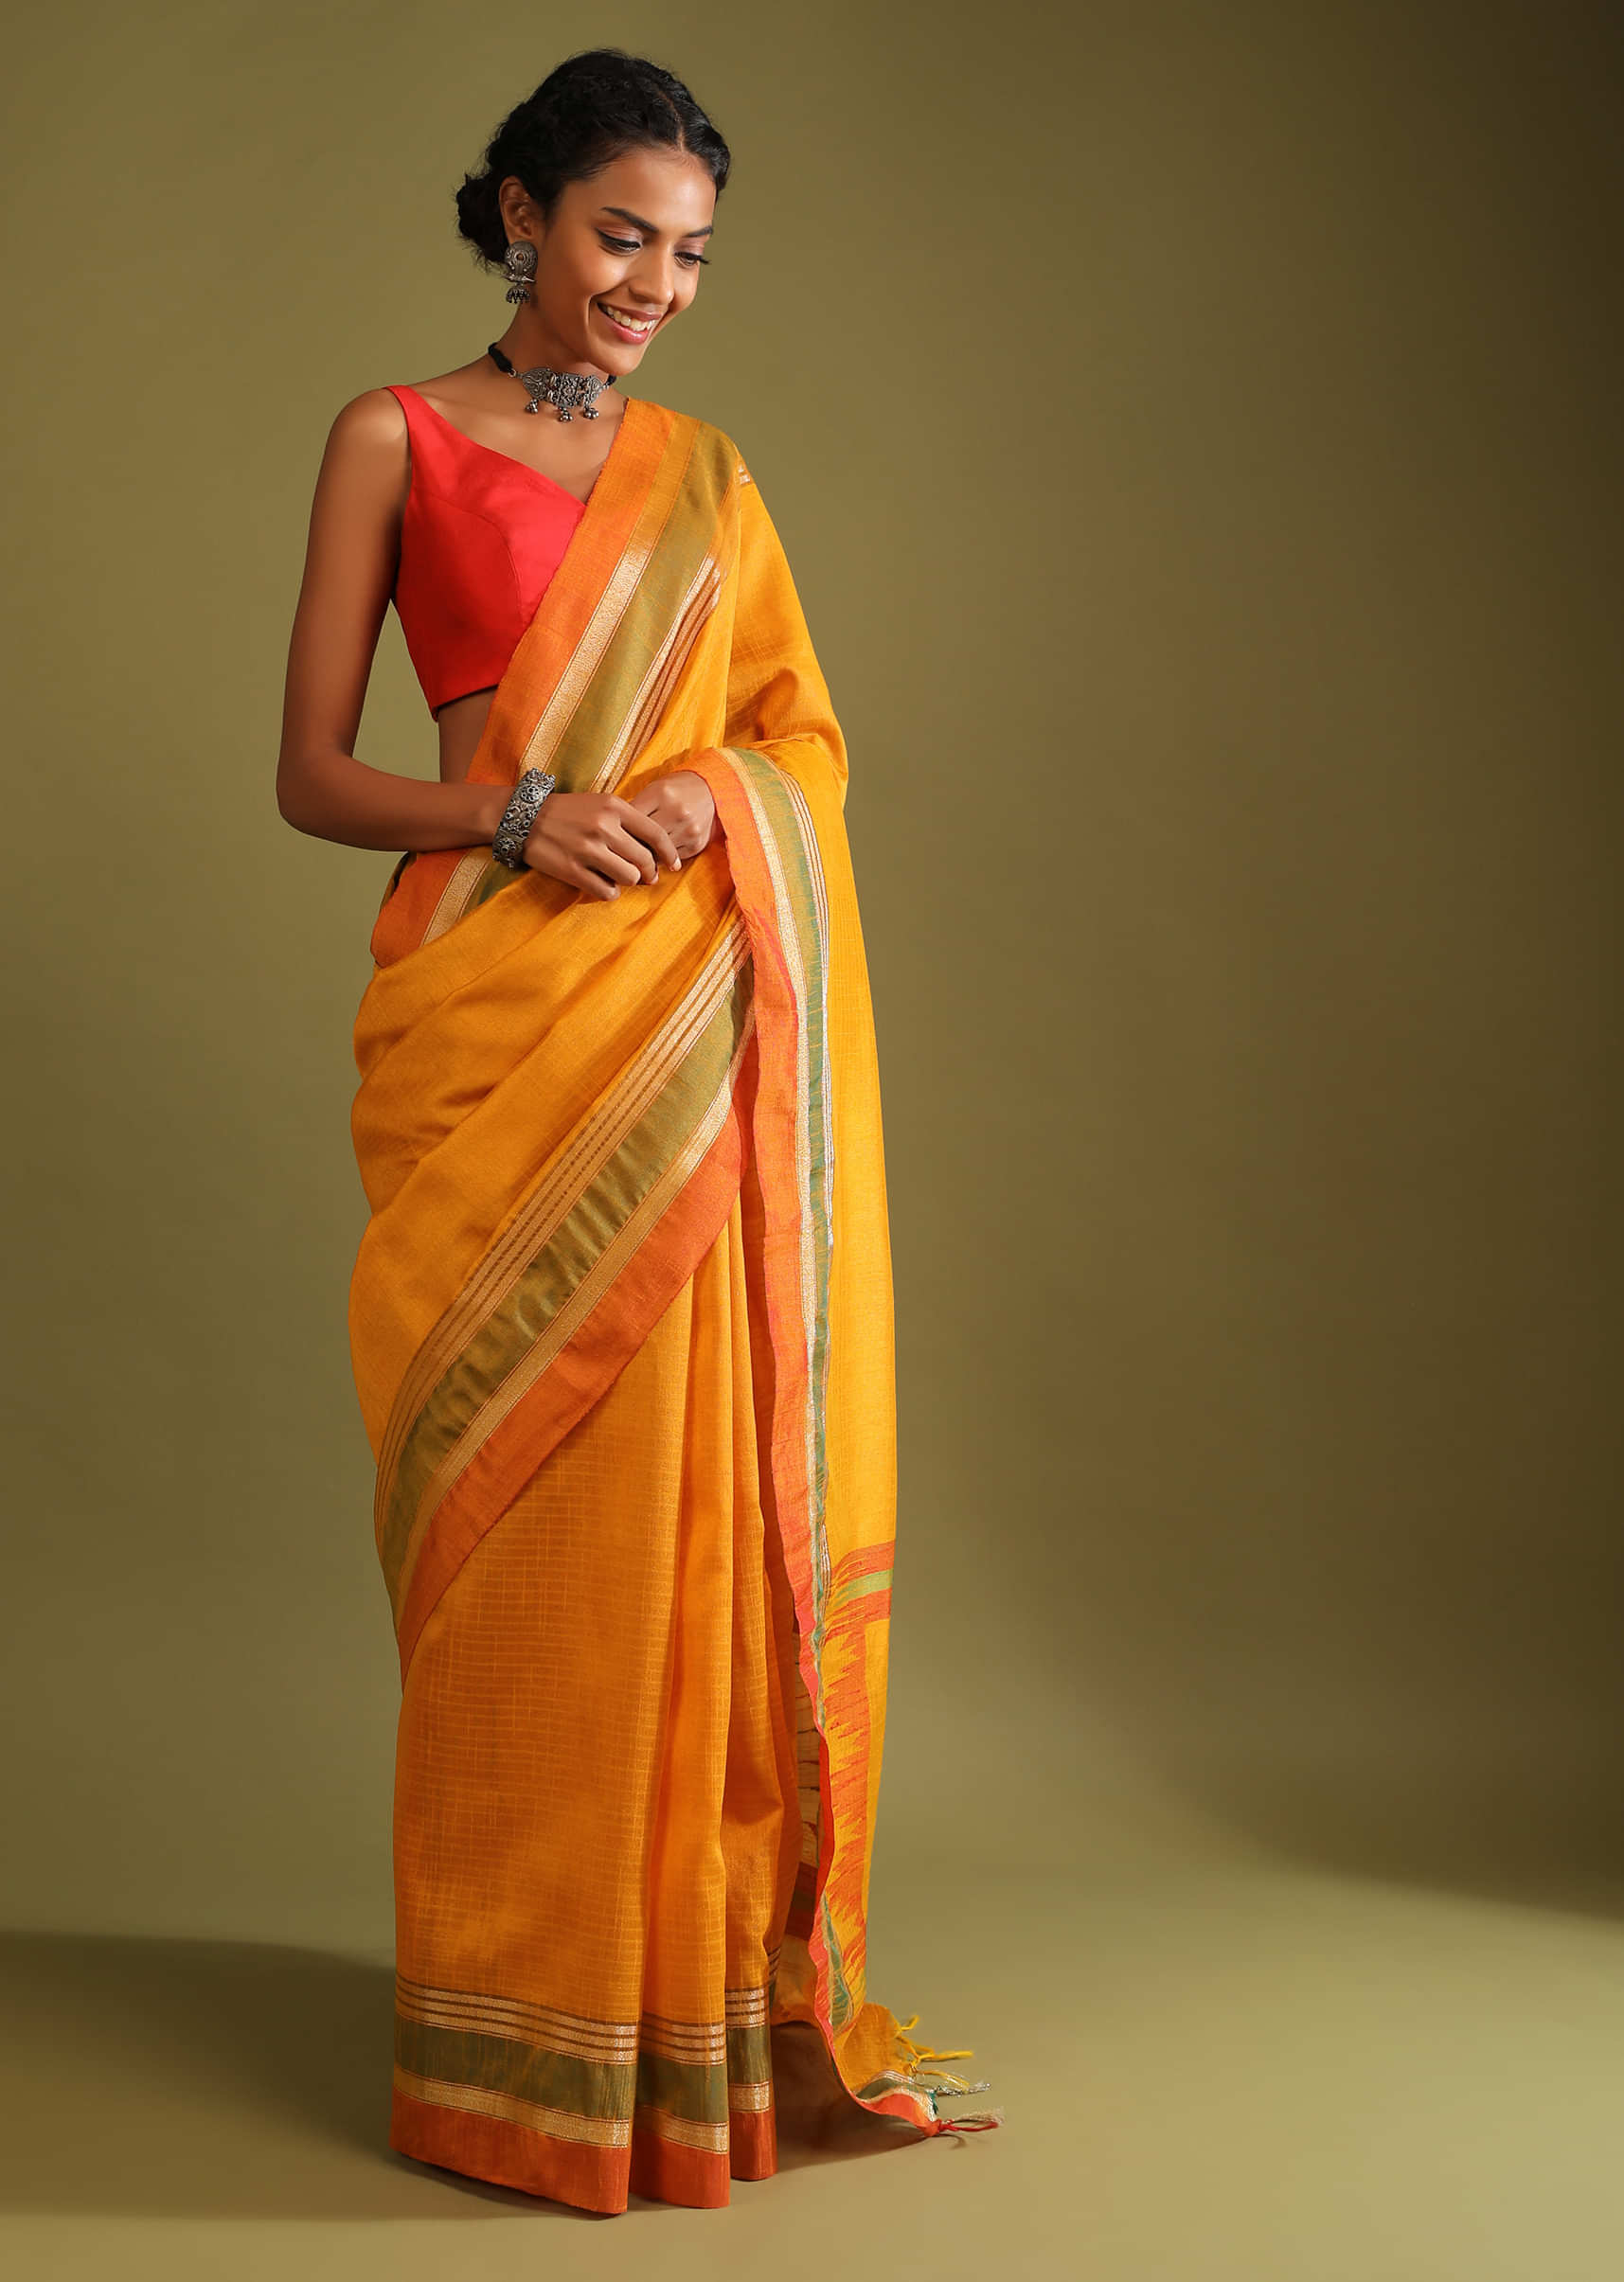 Golden Oak Yellow Saree In Tussar Silk With Multi Colored Thread Embroidered Abstract Design On The Pallu  